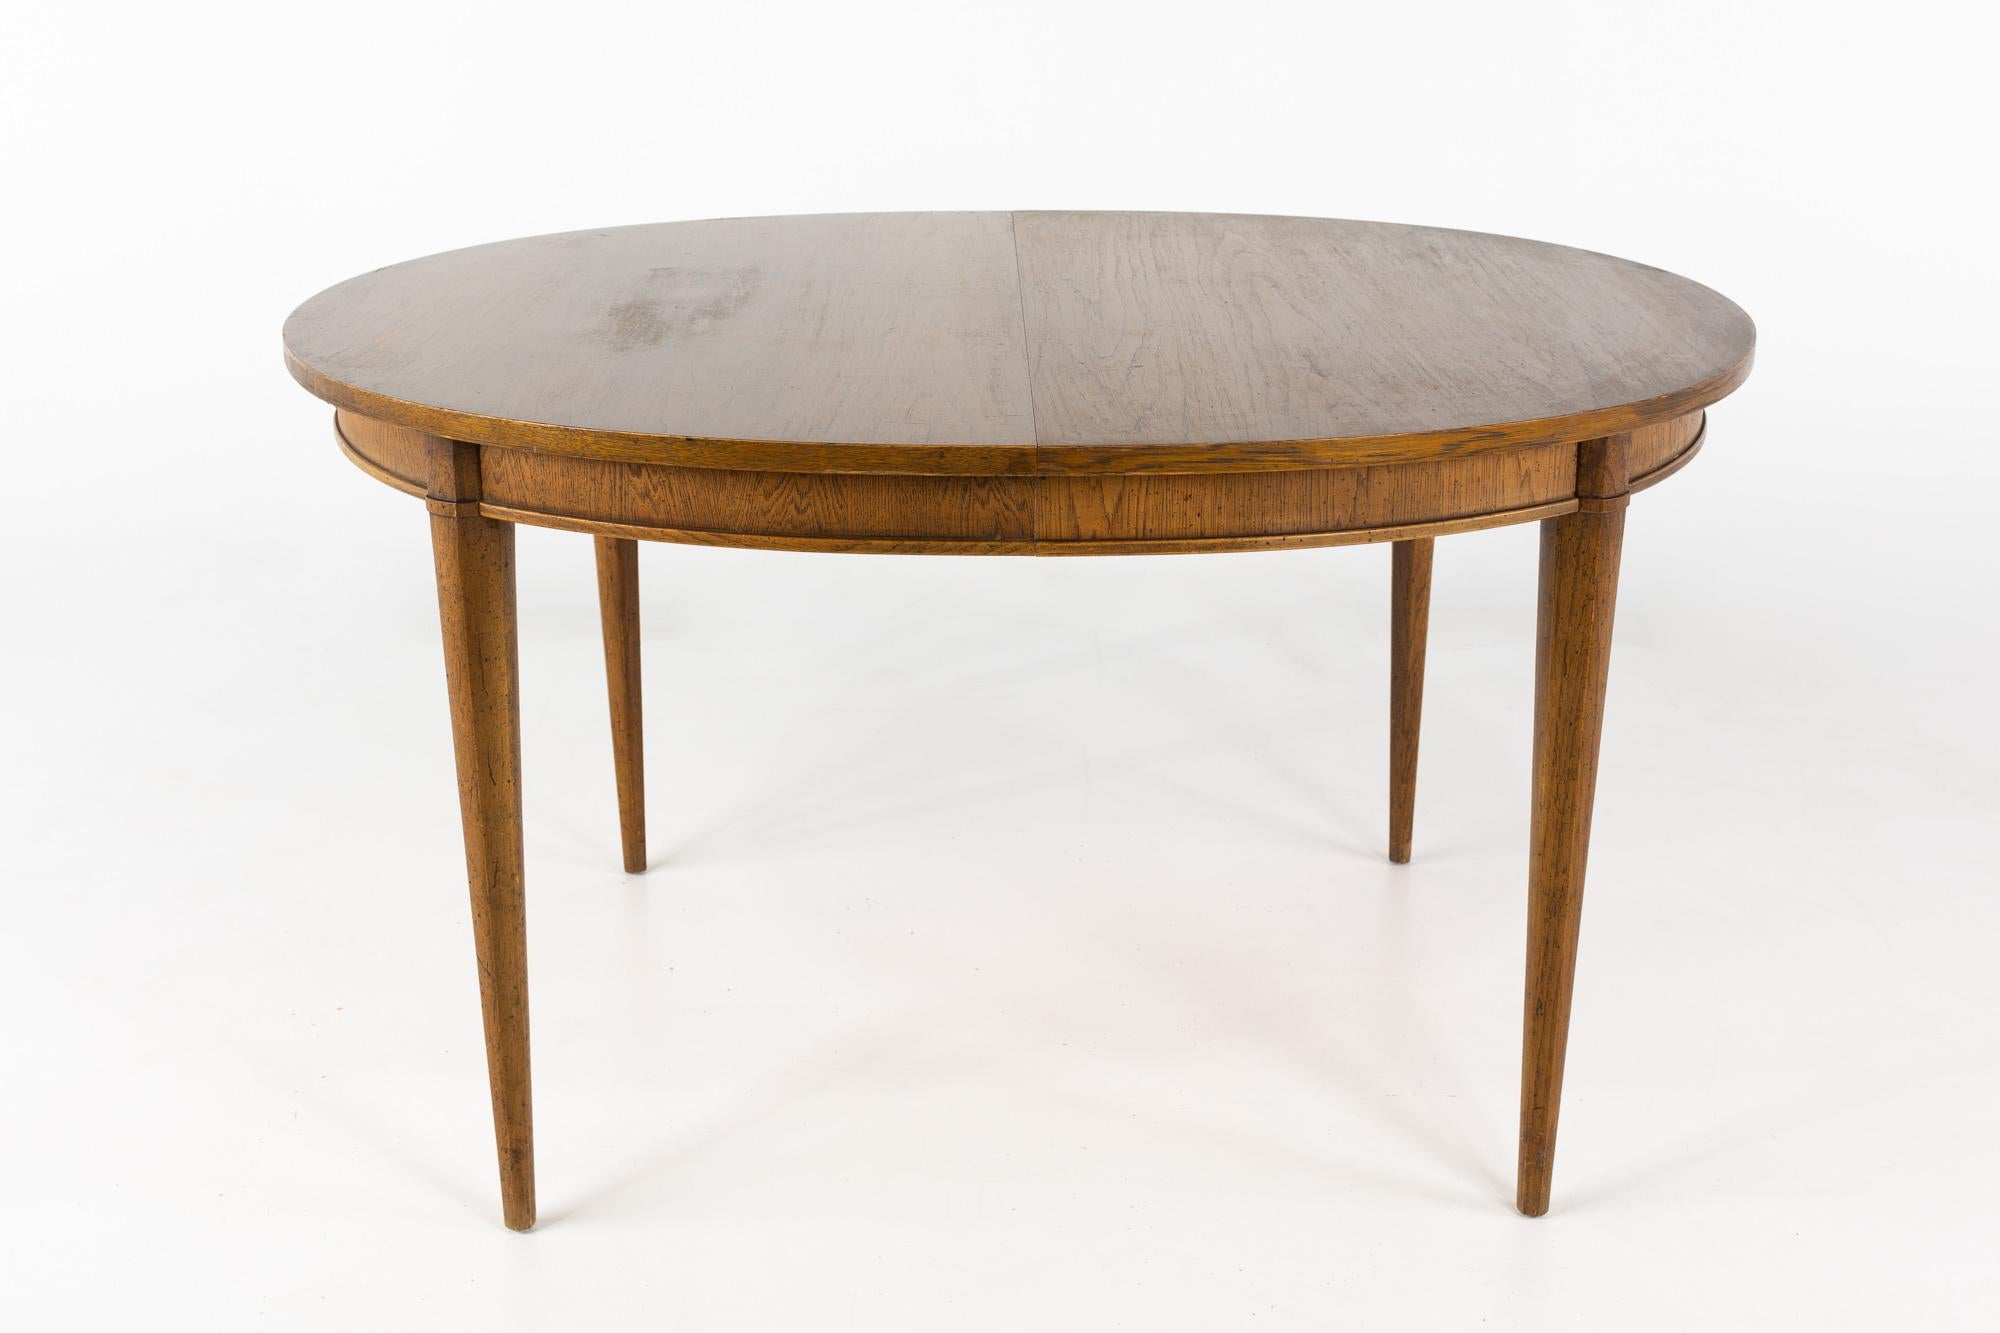 American Lane First Edition Style Mid Century Walnut Dining Table with 2 Leaves